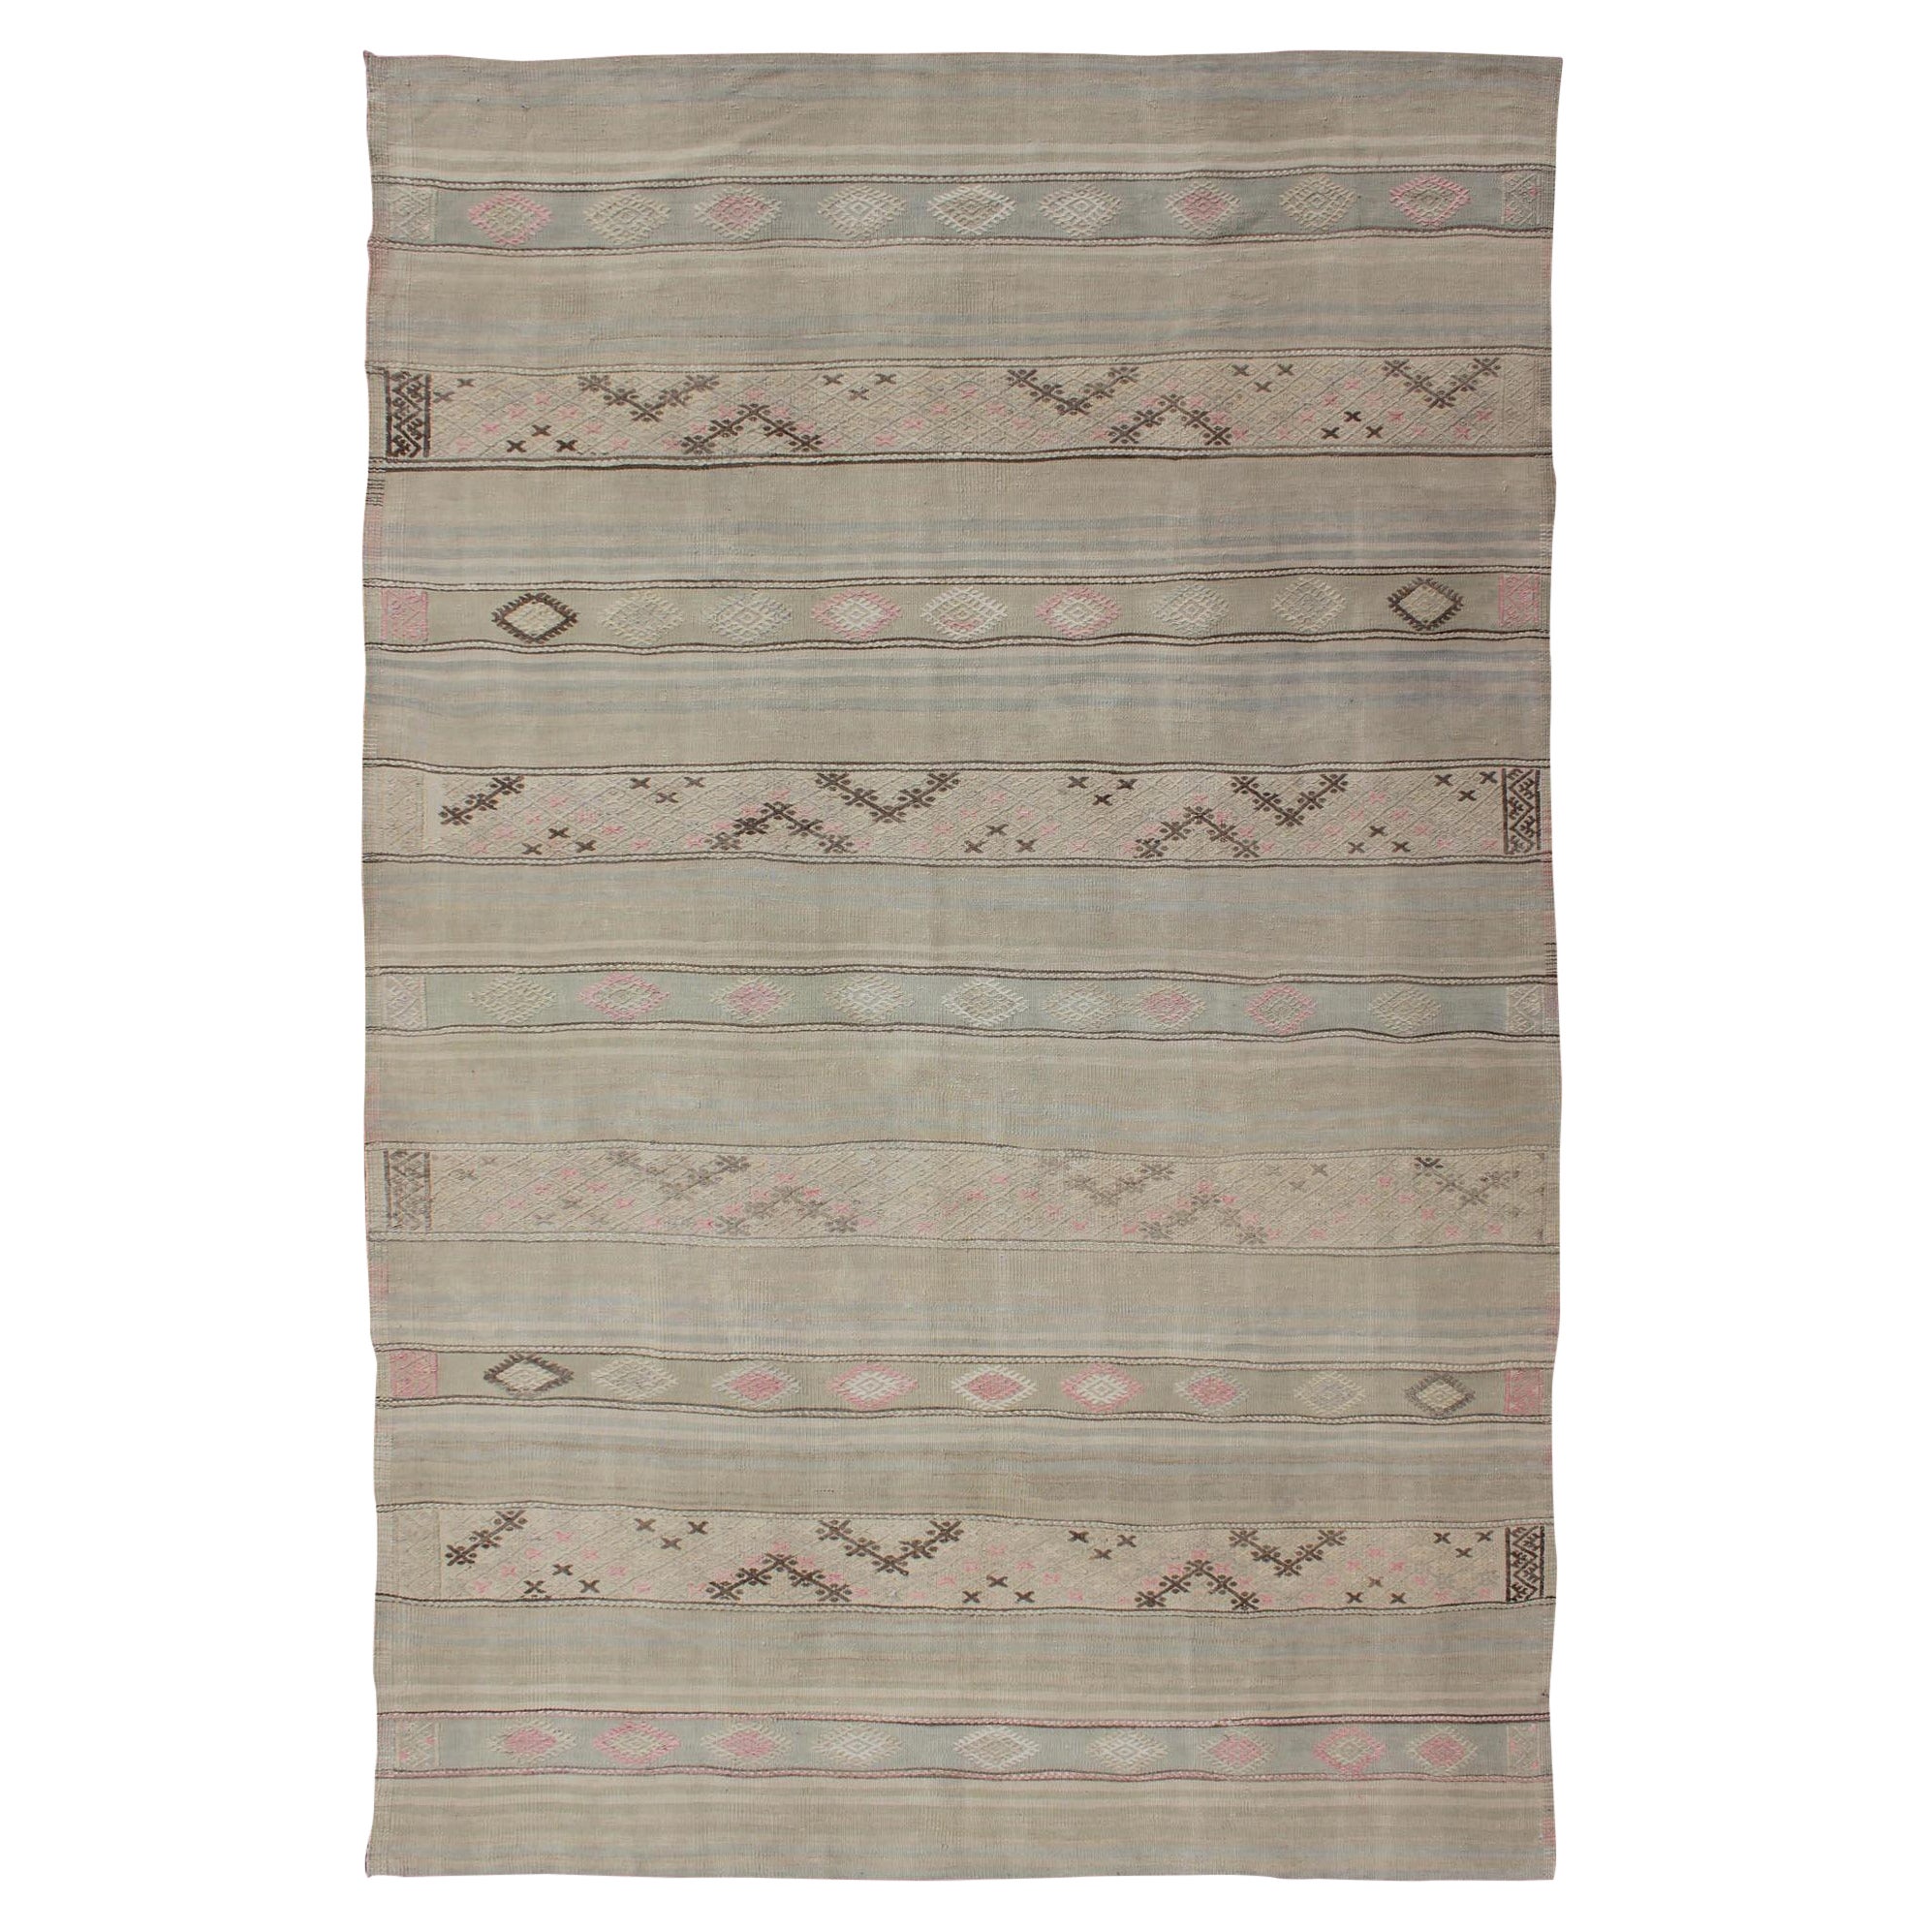 Vintage Turkish Flat-Weave Striped Kilim in Taupe, Pink, and Light Brown For Sale